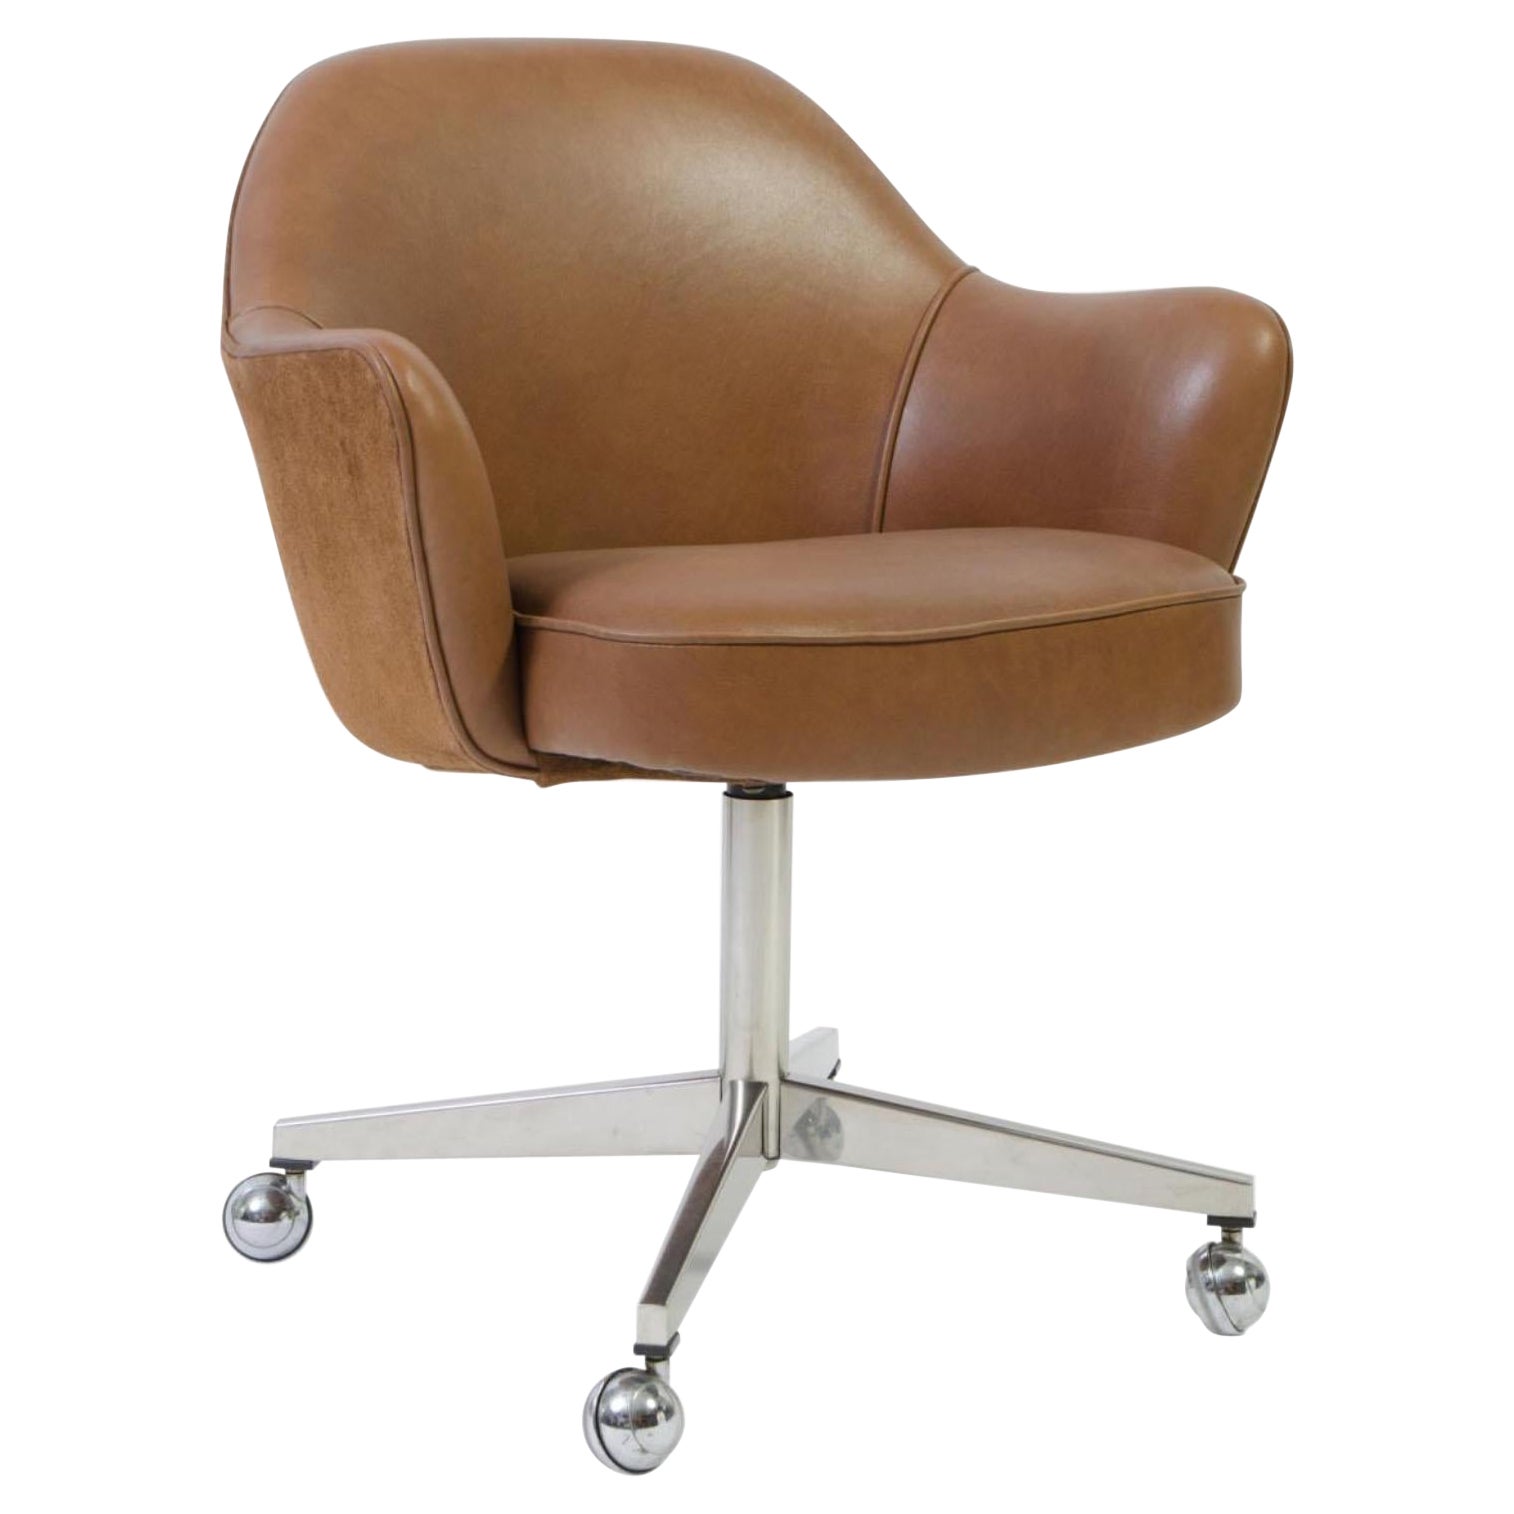 Knoll Desk Chair in Contrasting Saddle Leather/Suede, Vintage Swivel Base For Sale